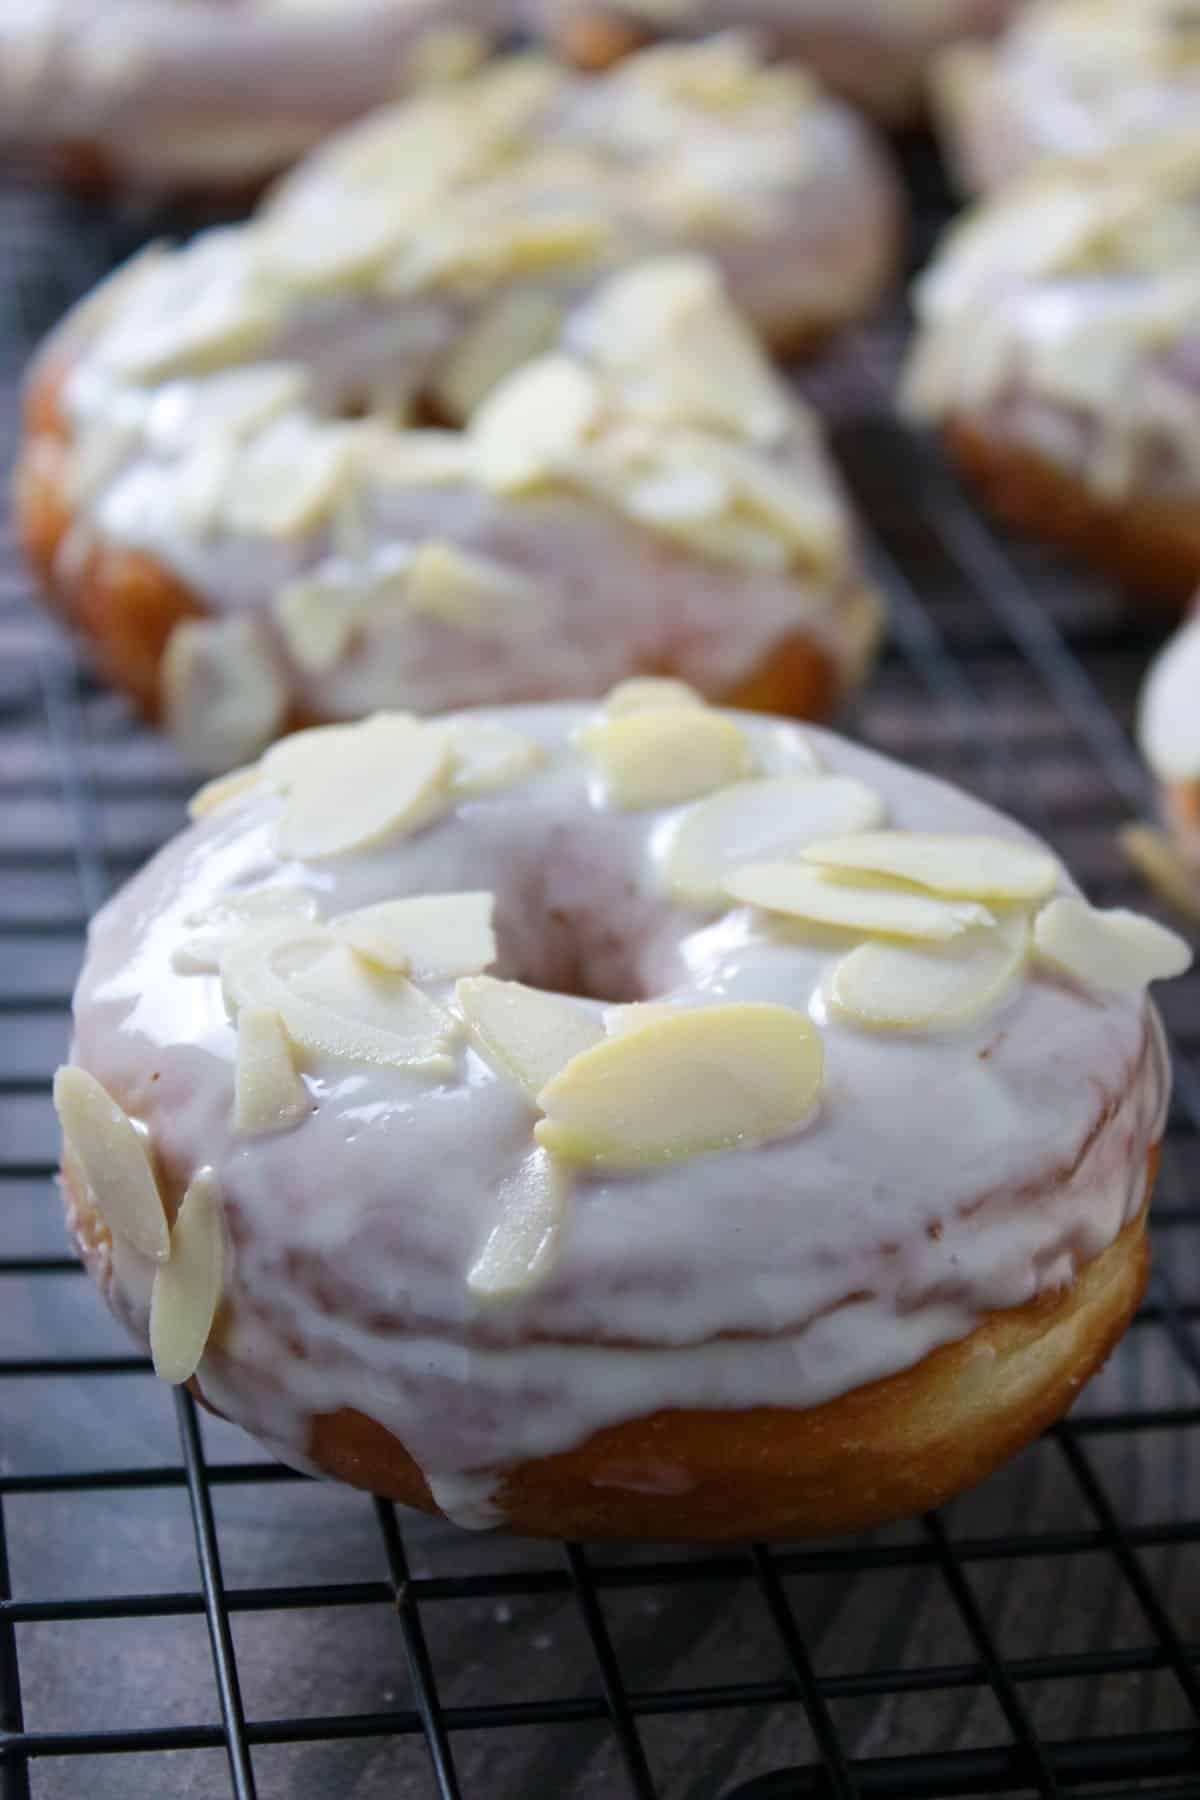 Close up shot of a white chocolate yeast donut.